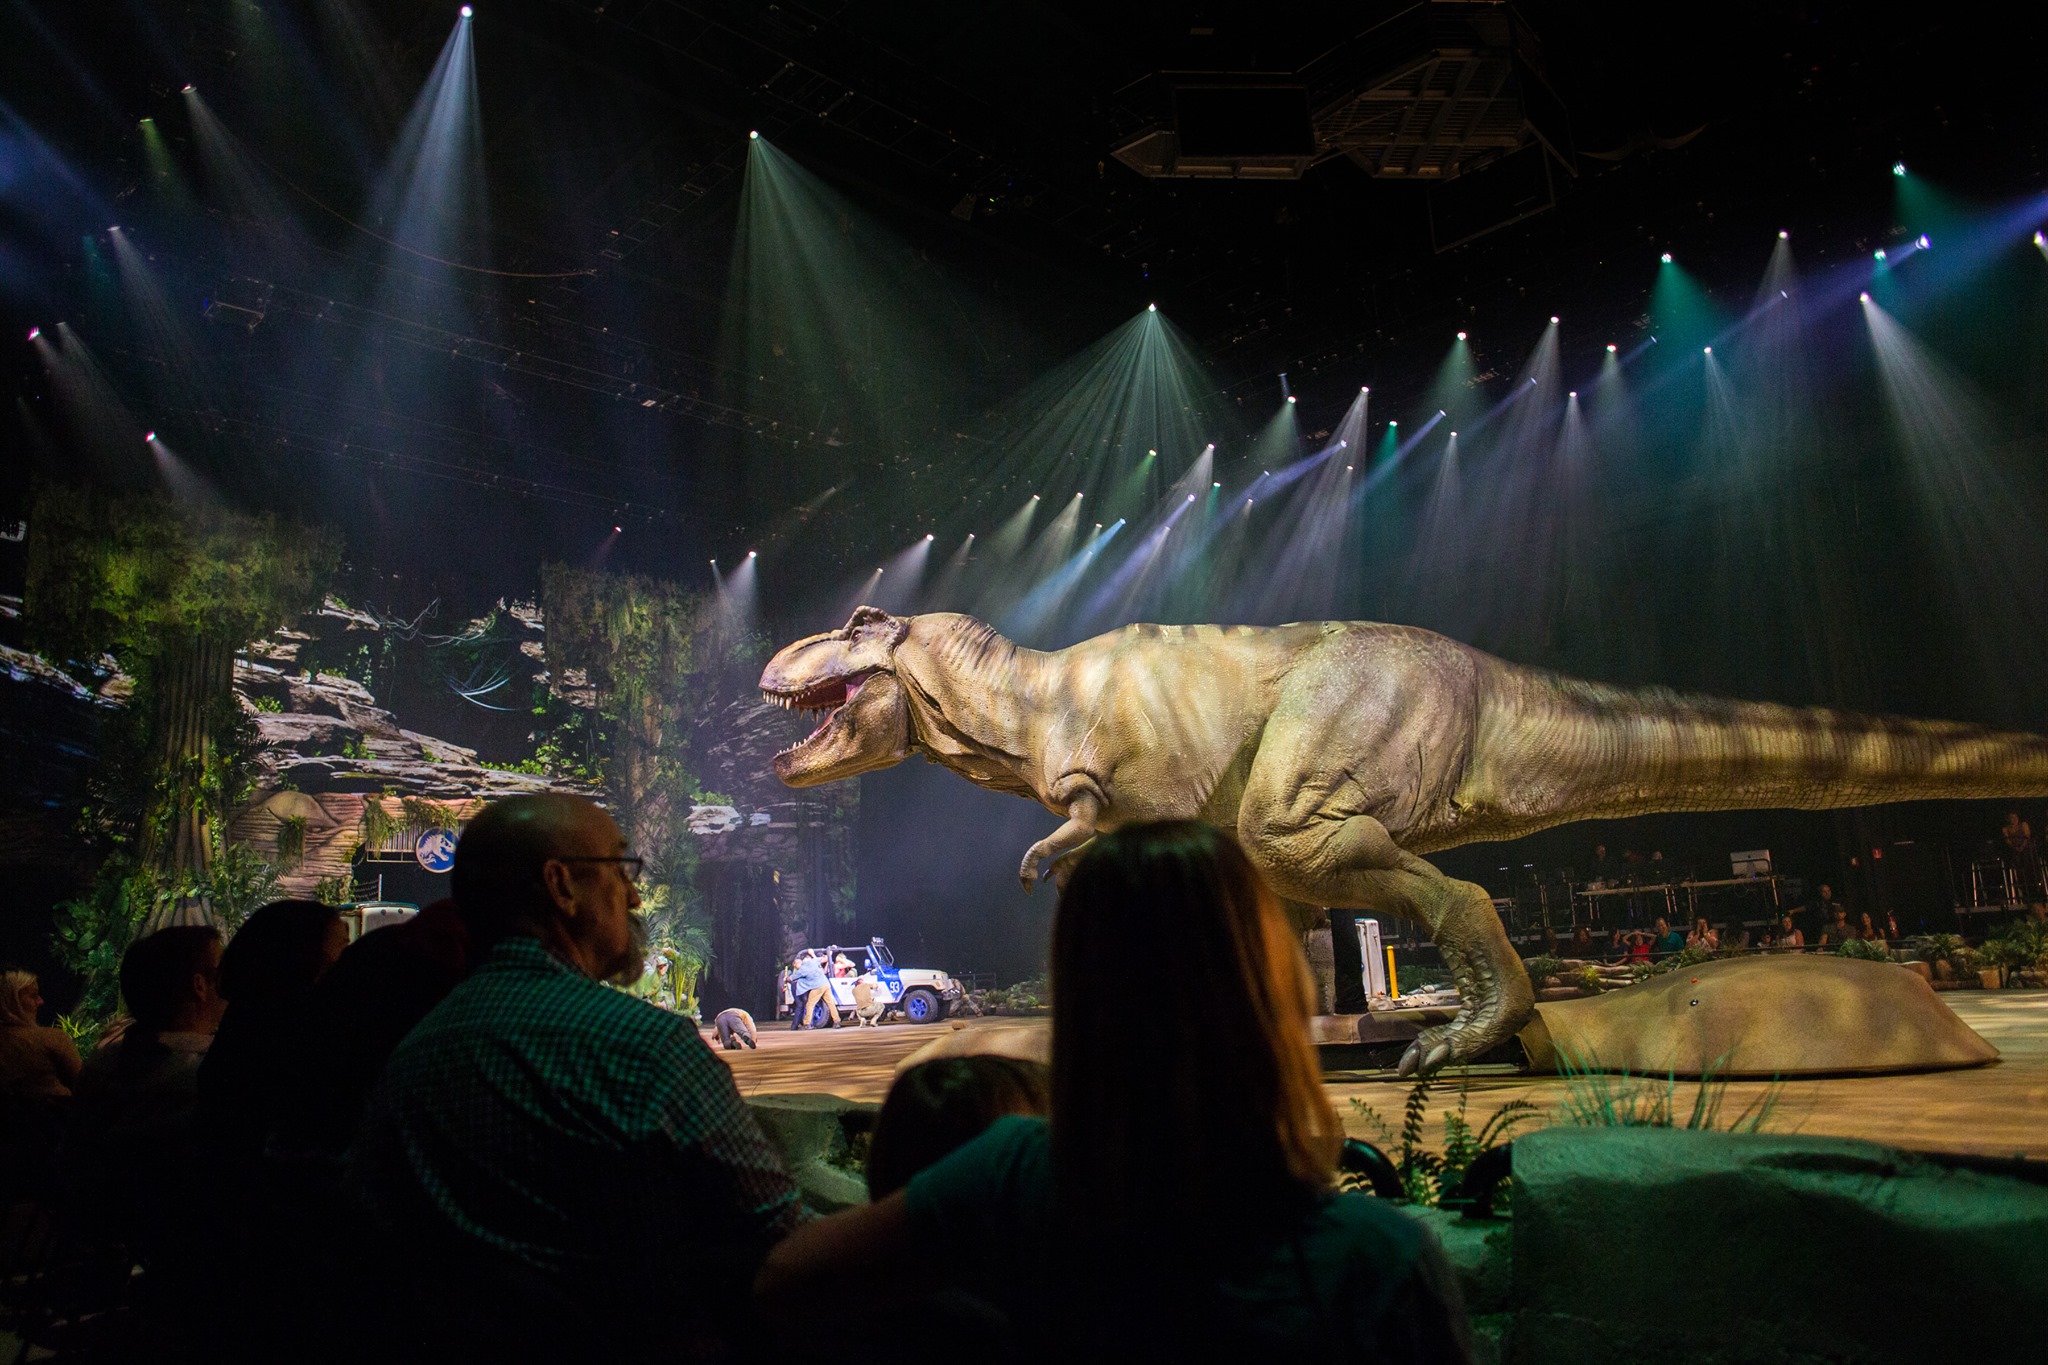 Audience watches show with t-rex and jeep in background